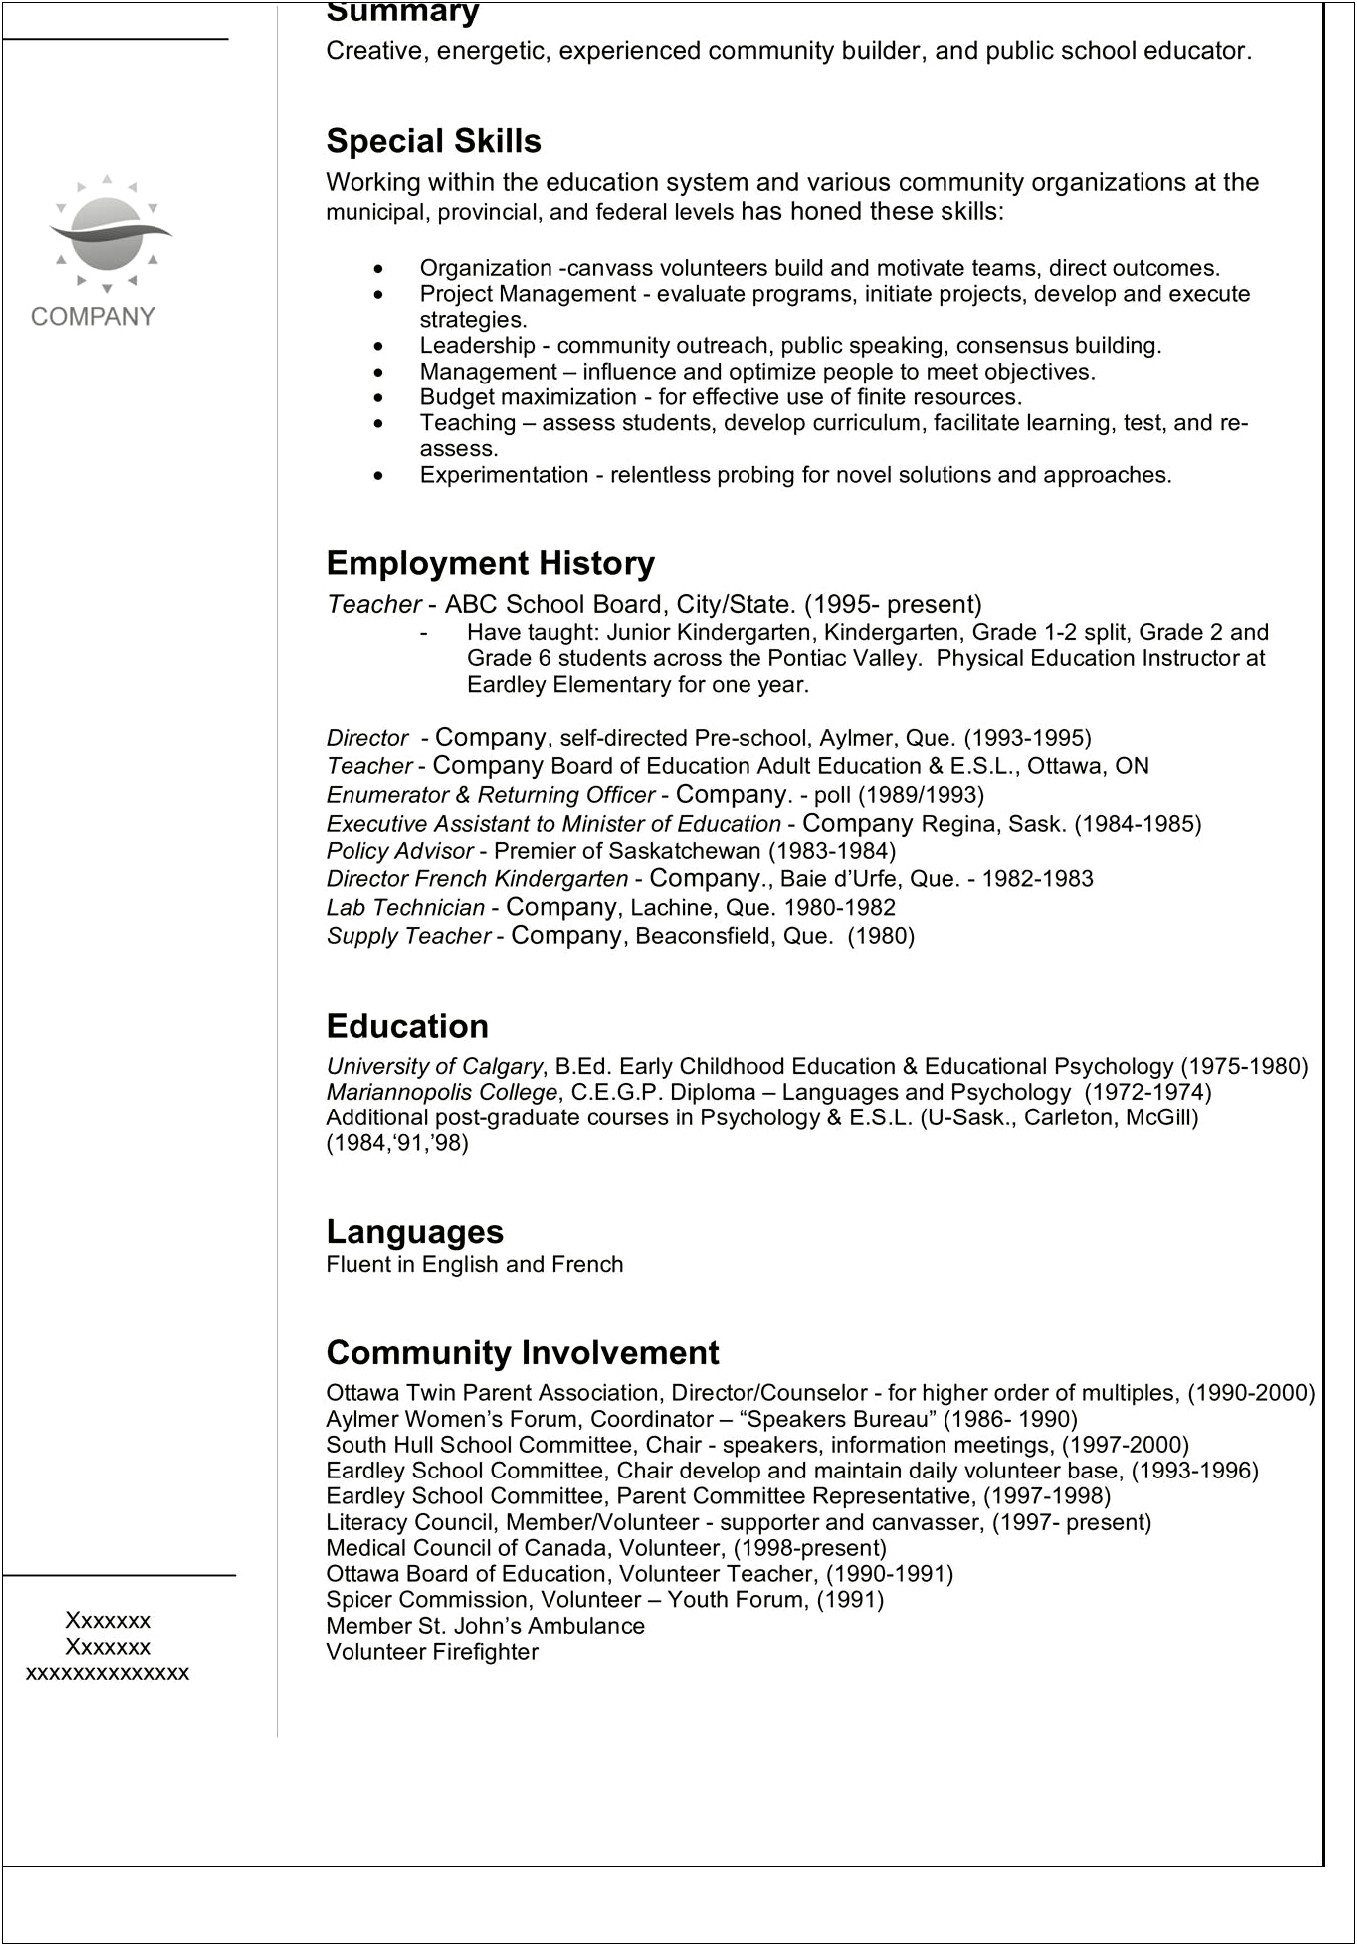 All Jobs On Resume Or Specific